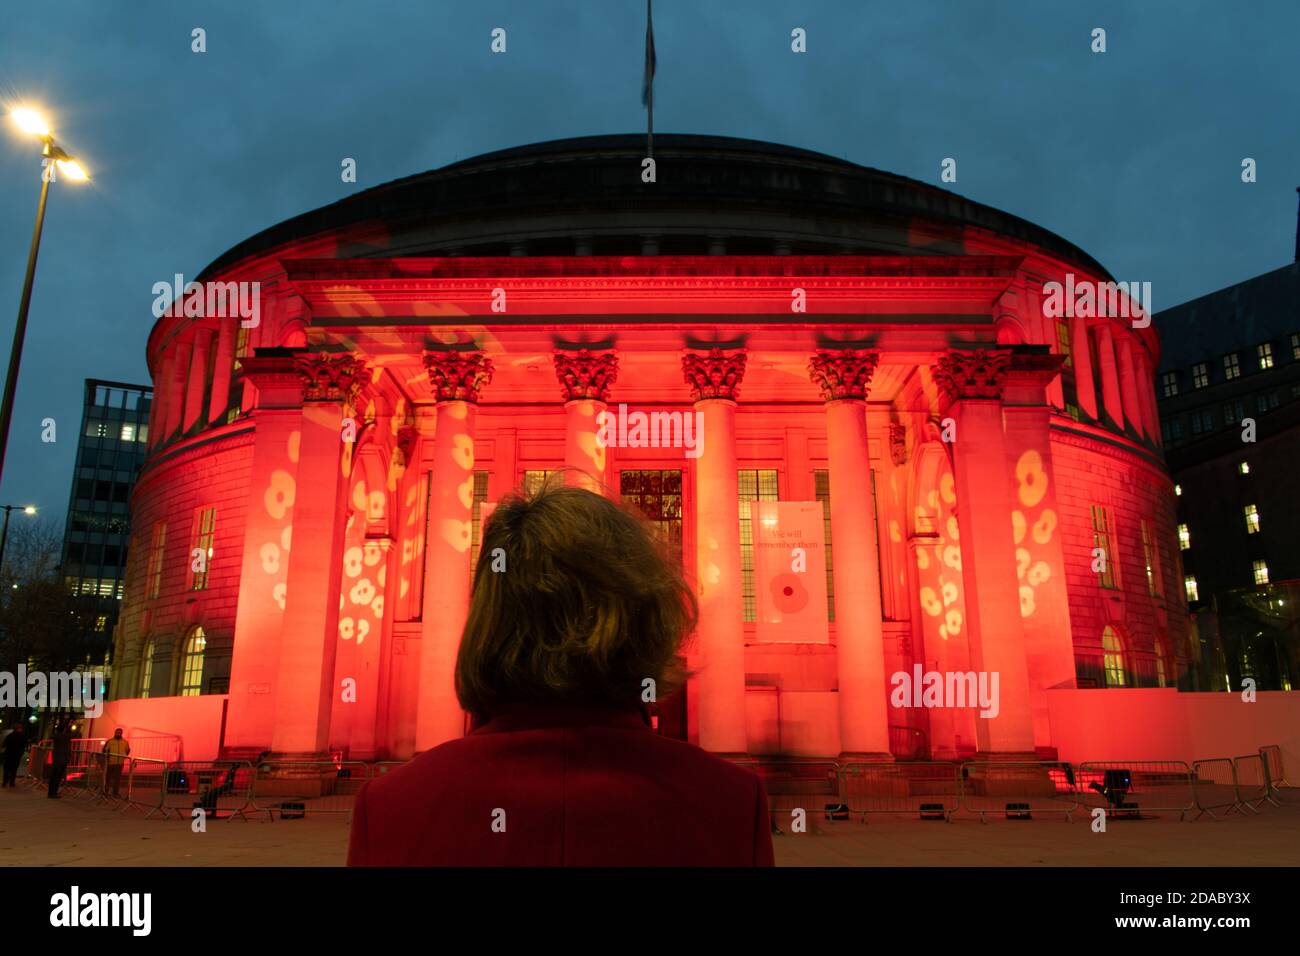 Armistice Day Commemoration during lockdown. Manchester Central Library, UK lit with red light and poppy design. Woman looking on. Public Building. Stock Photo